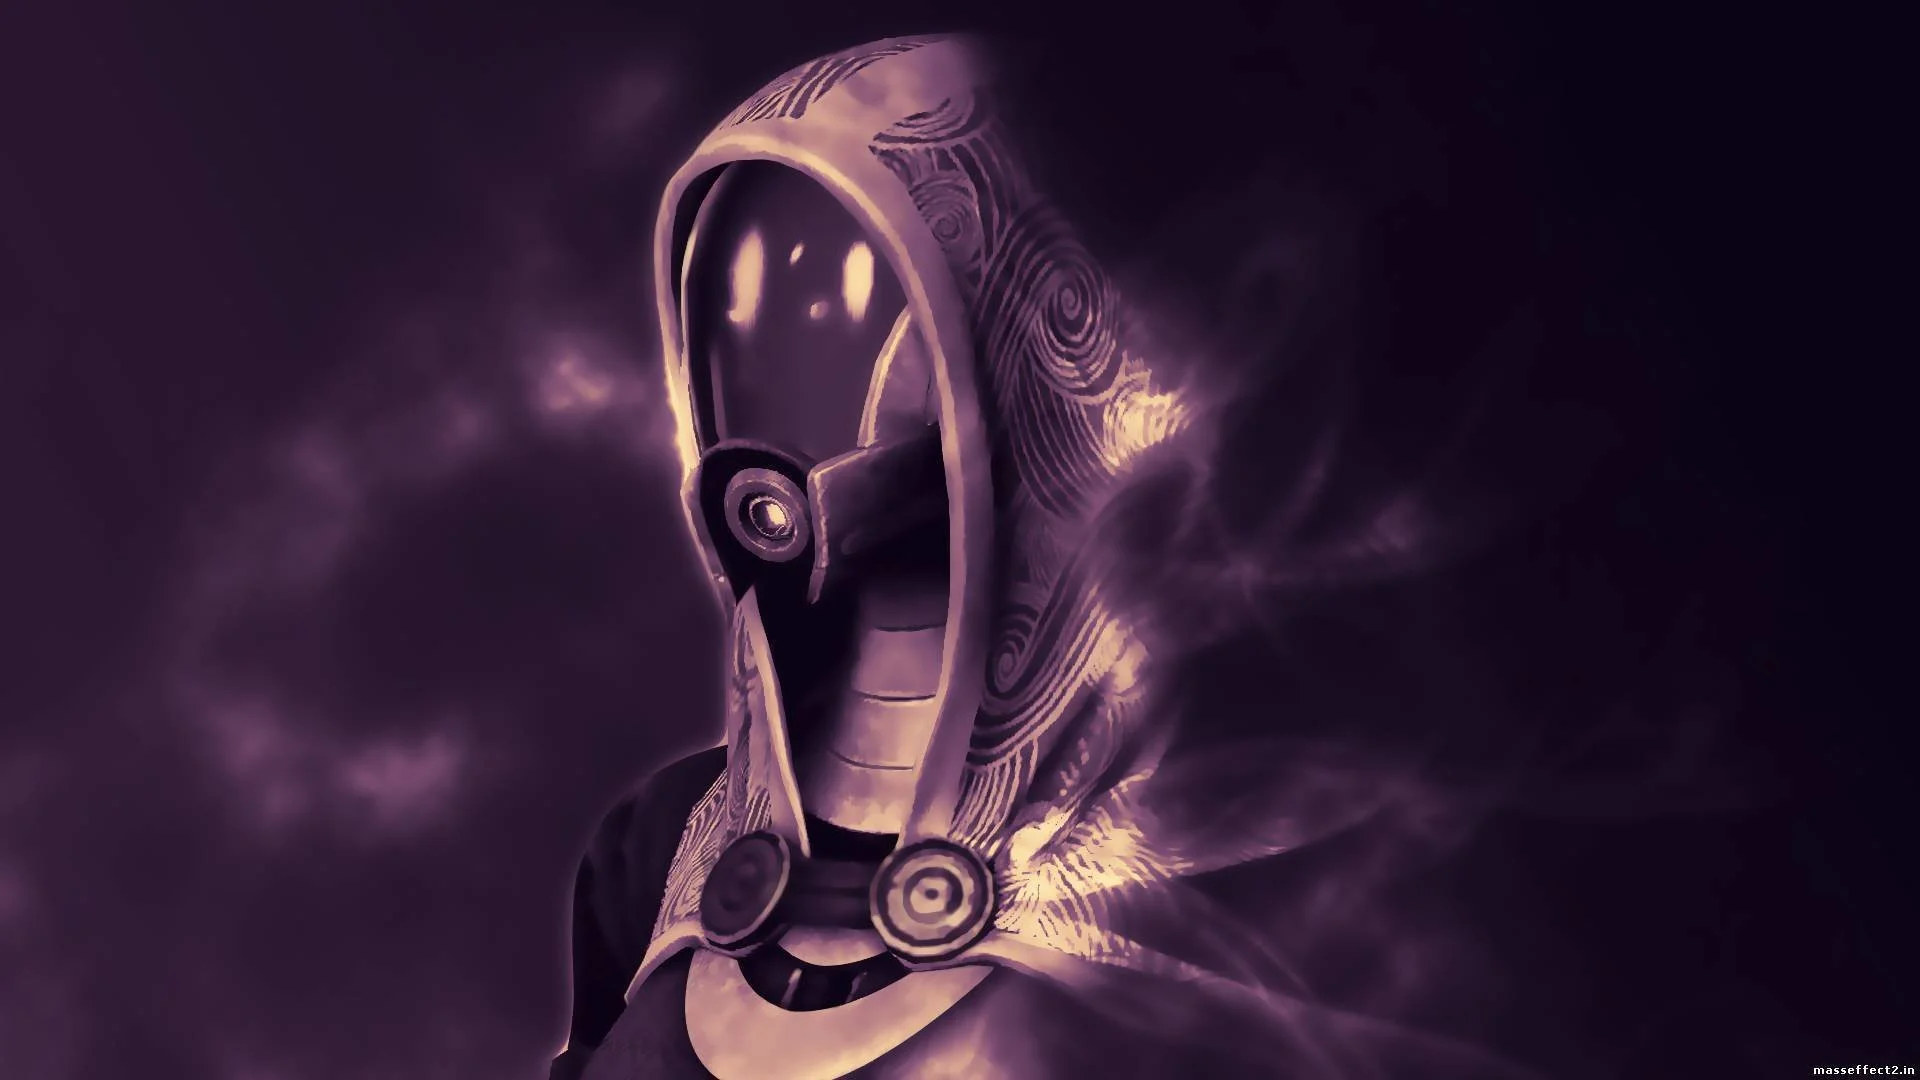 On request, some Tali wallpapers from Mass Effect. Taking requests.